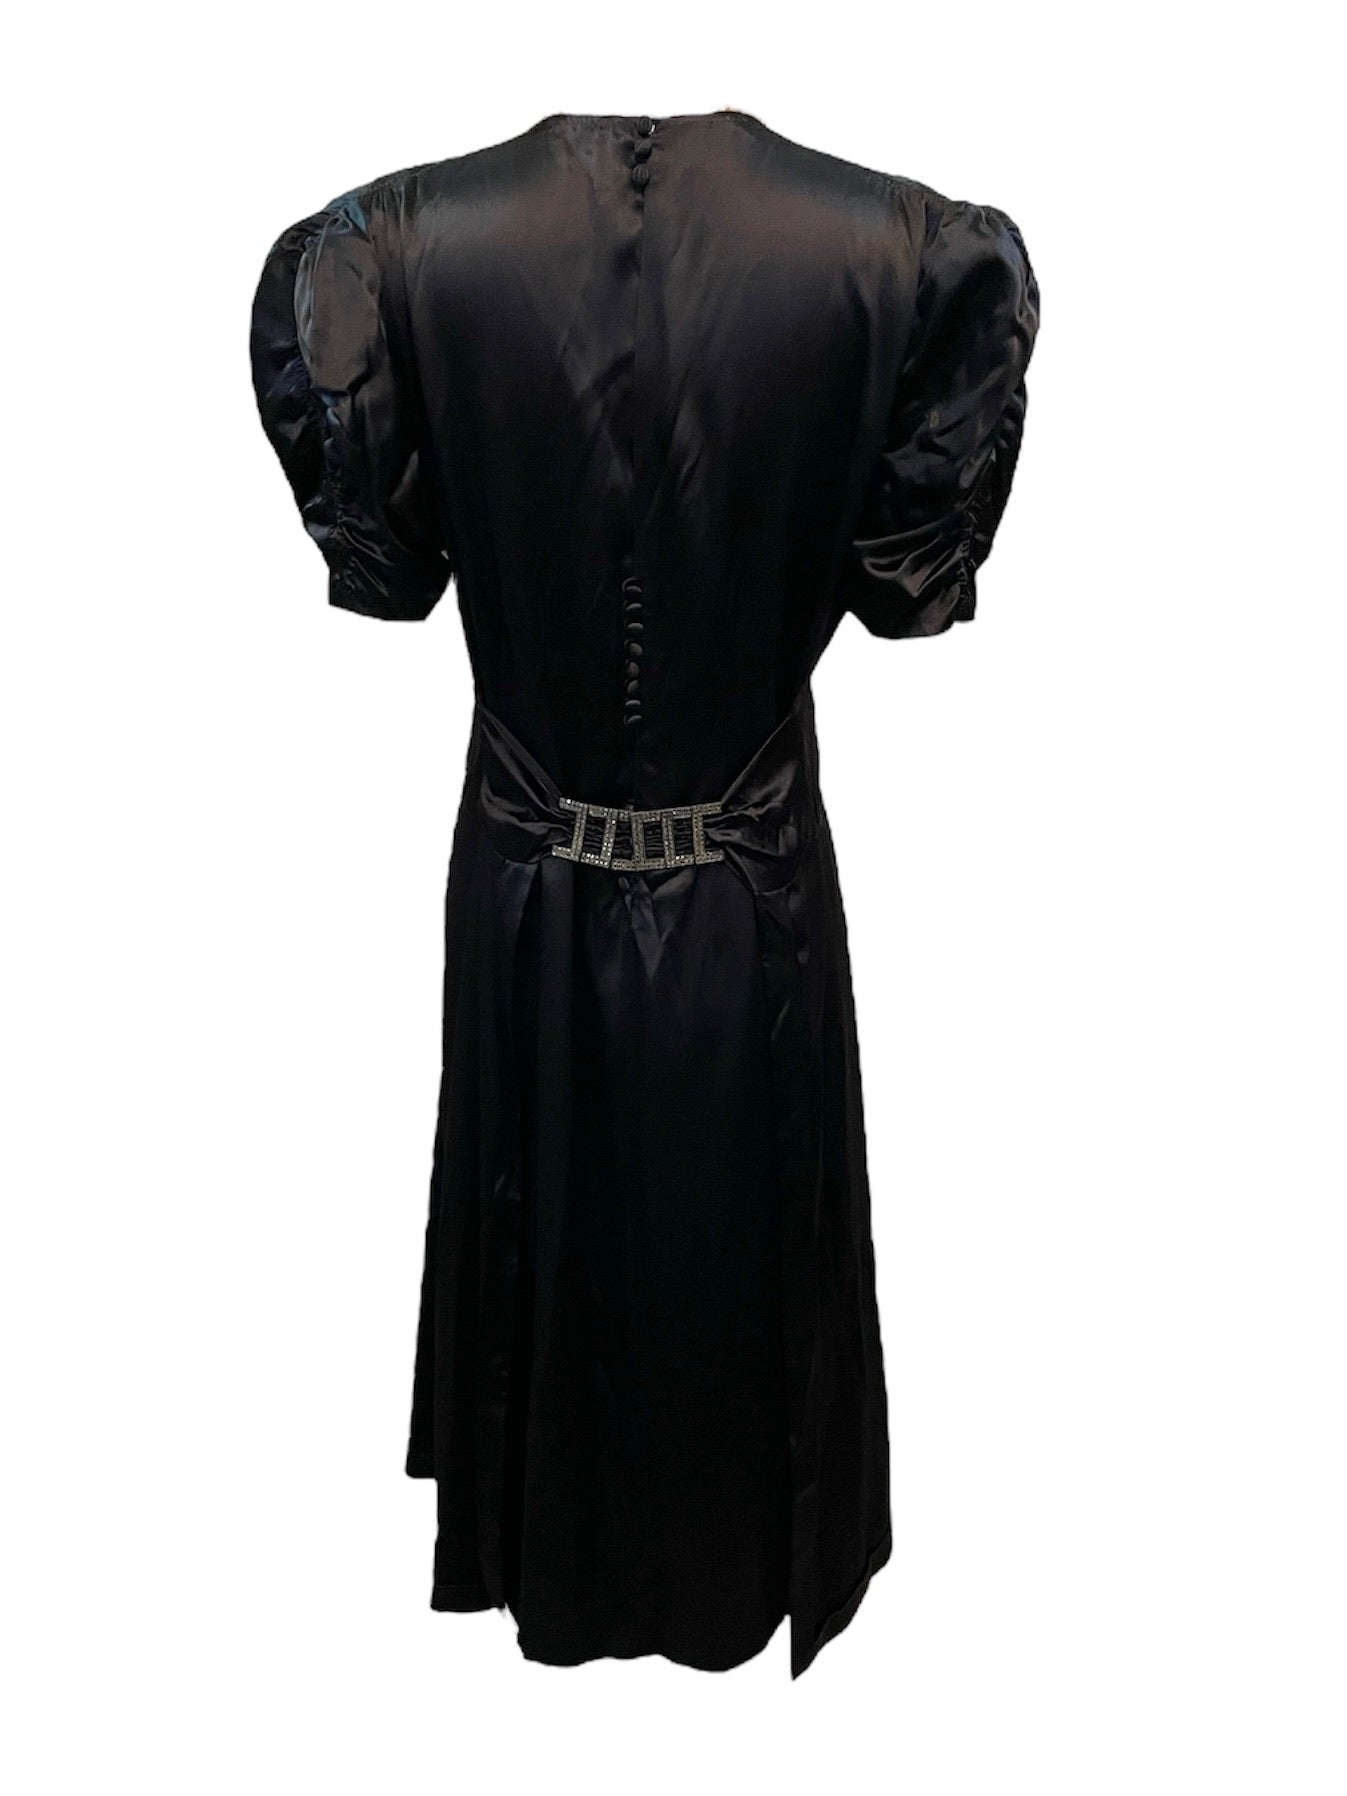 30s Black Satin Dress with Marcasite Buckle/ back 30s Black Satin Party Dress with Marcasite Buckle BACK 3 of 5